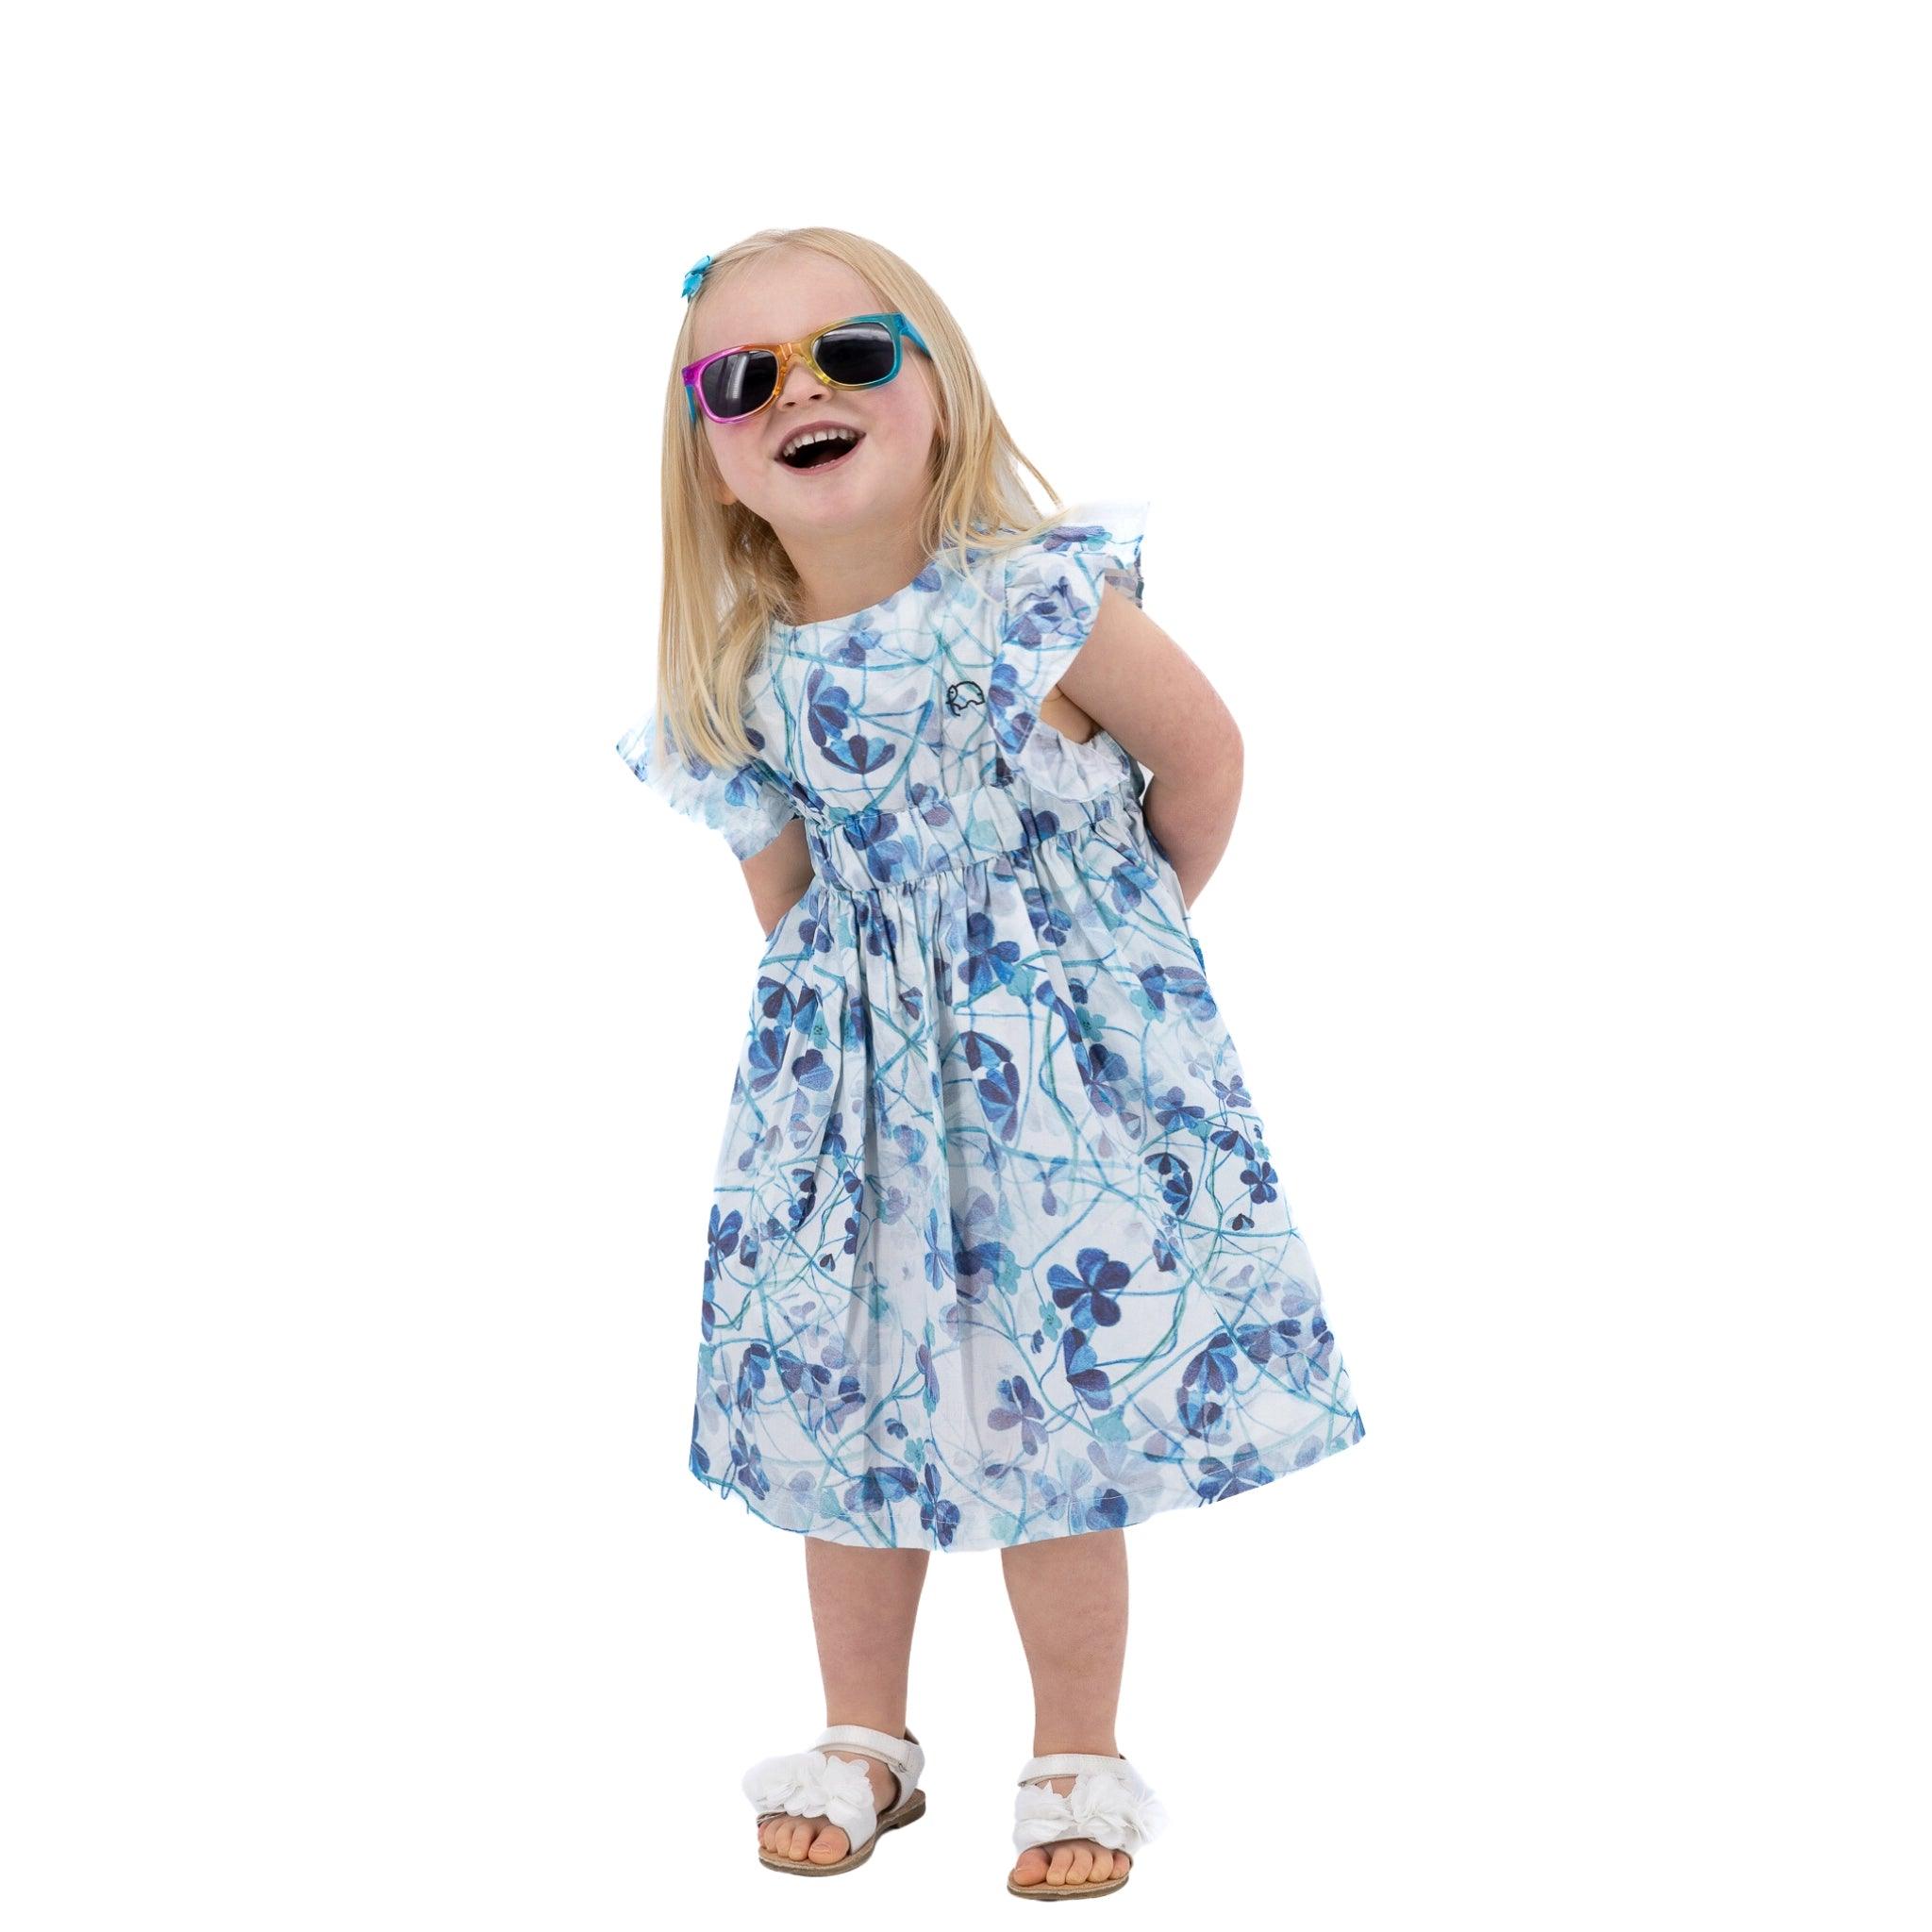 A young girl in a Karee Blue Cotton Floral Dress for Girls and sunglasses laughing joyfully, isolated on a white background.